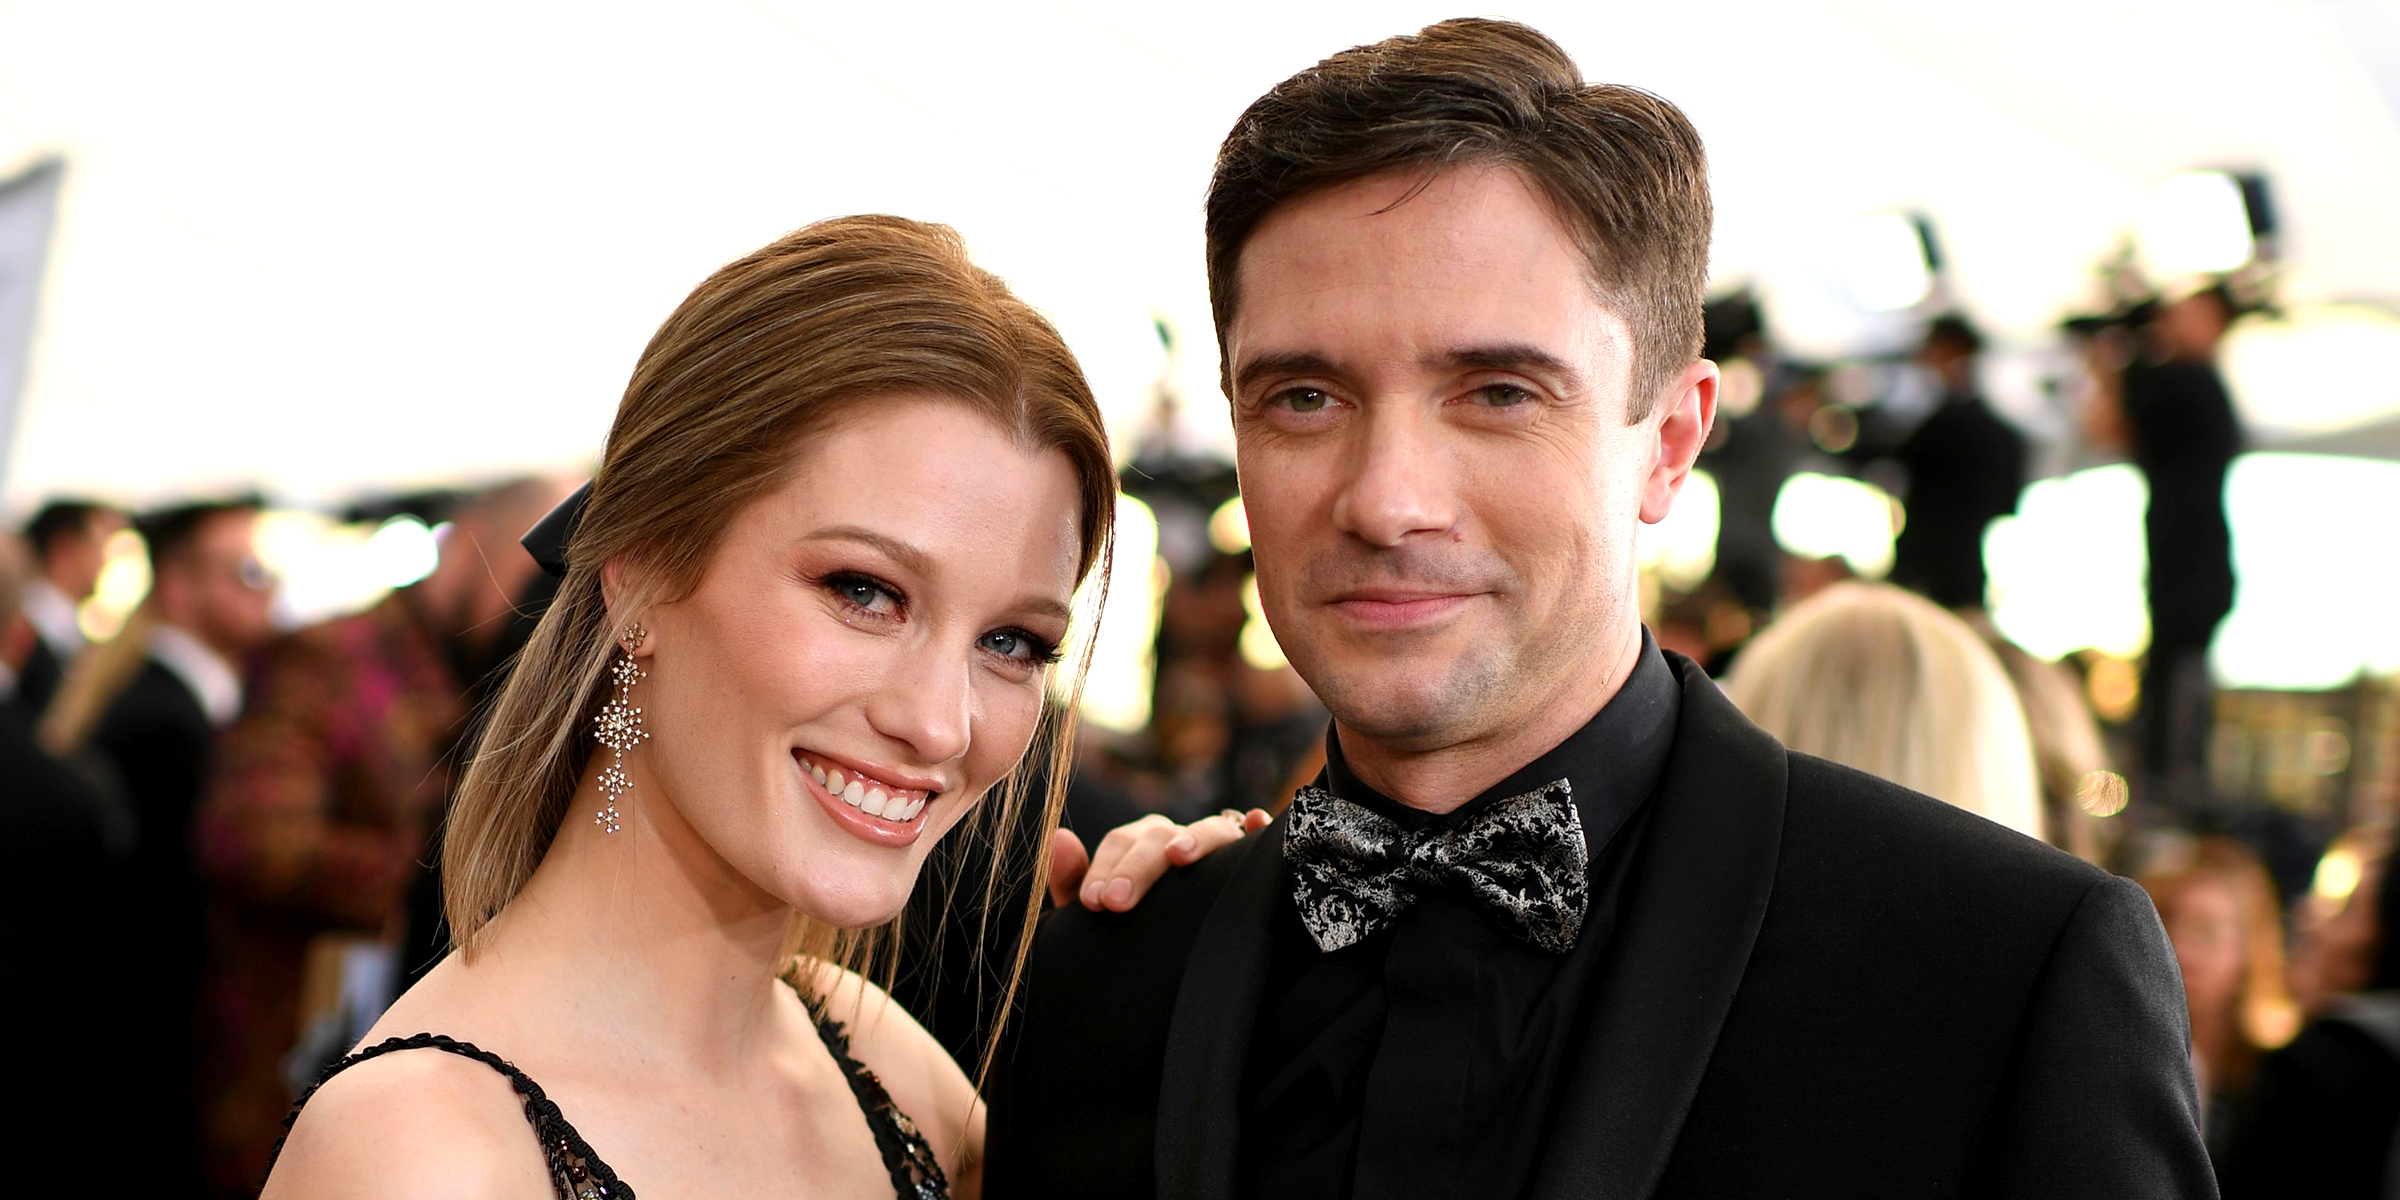 Topher Grace and Ashley Hinshaw | Source: Getty Images